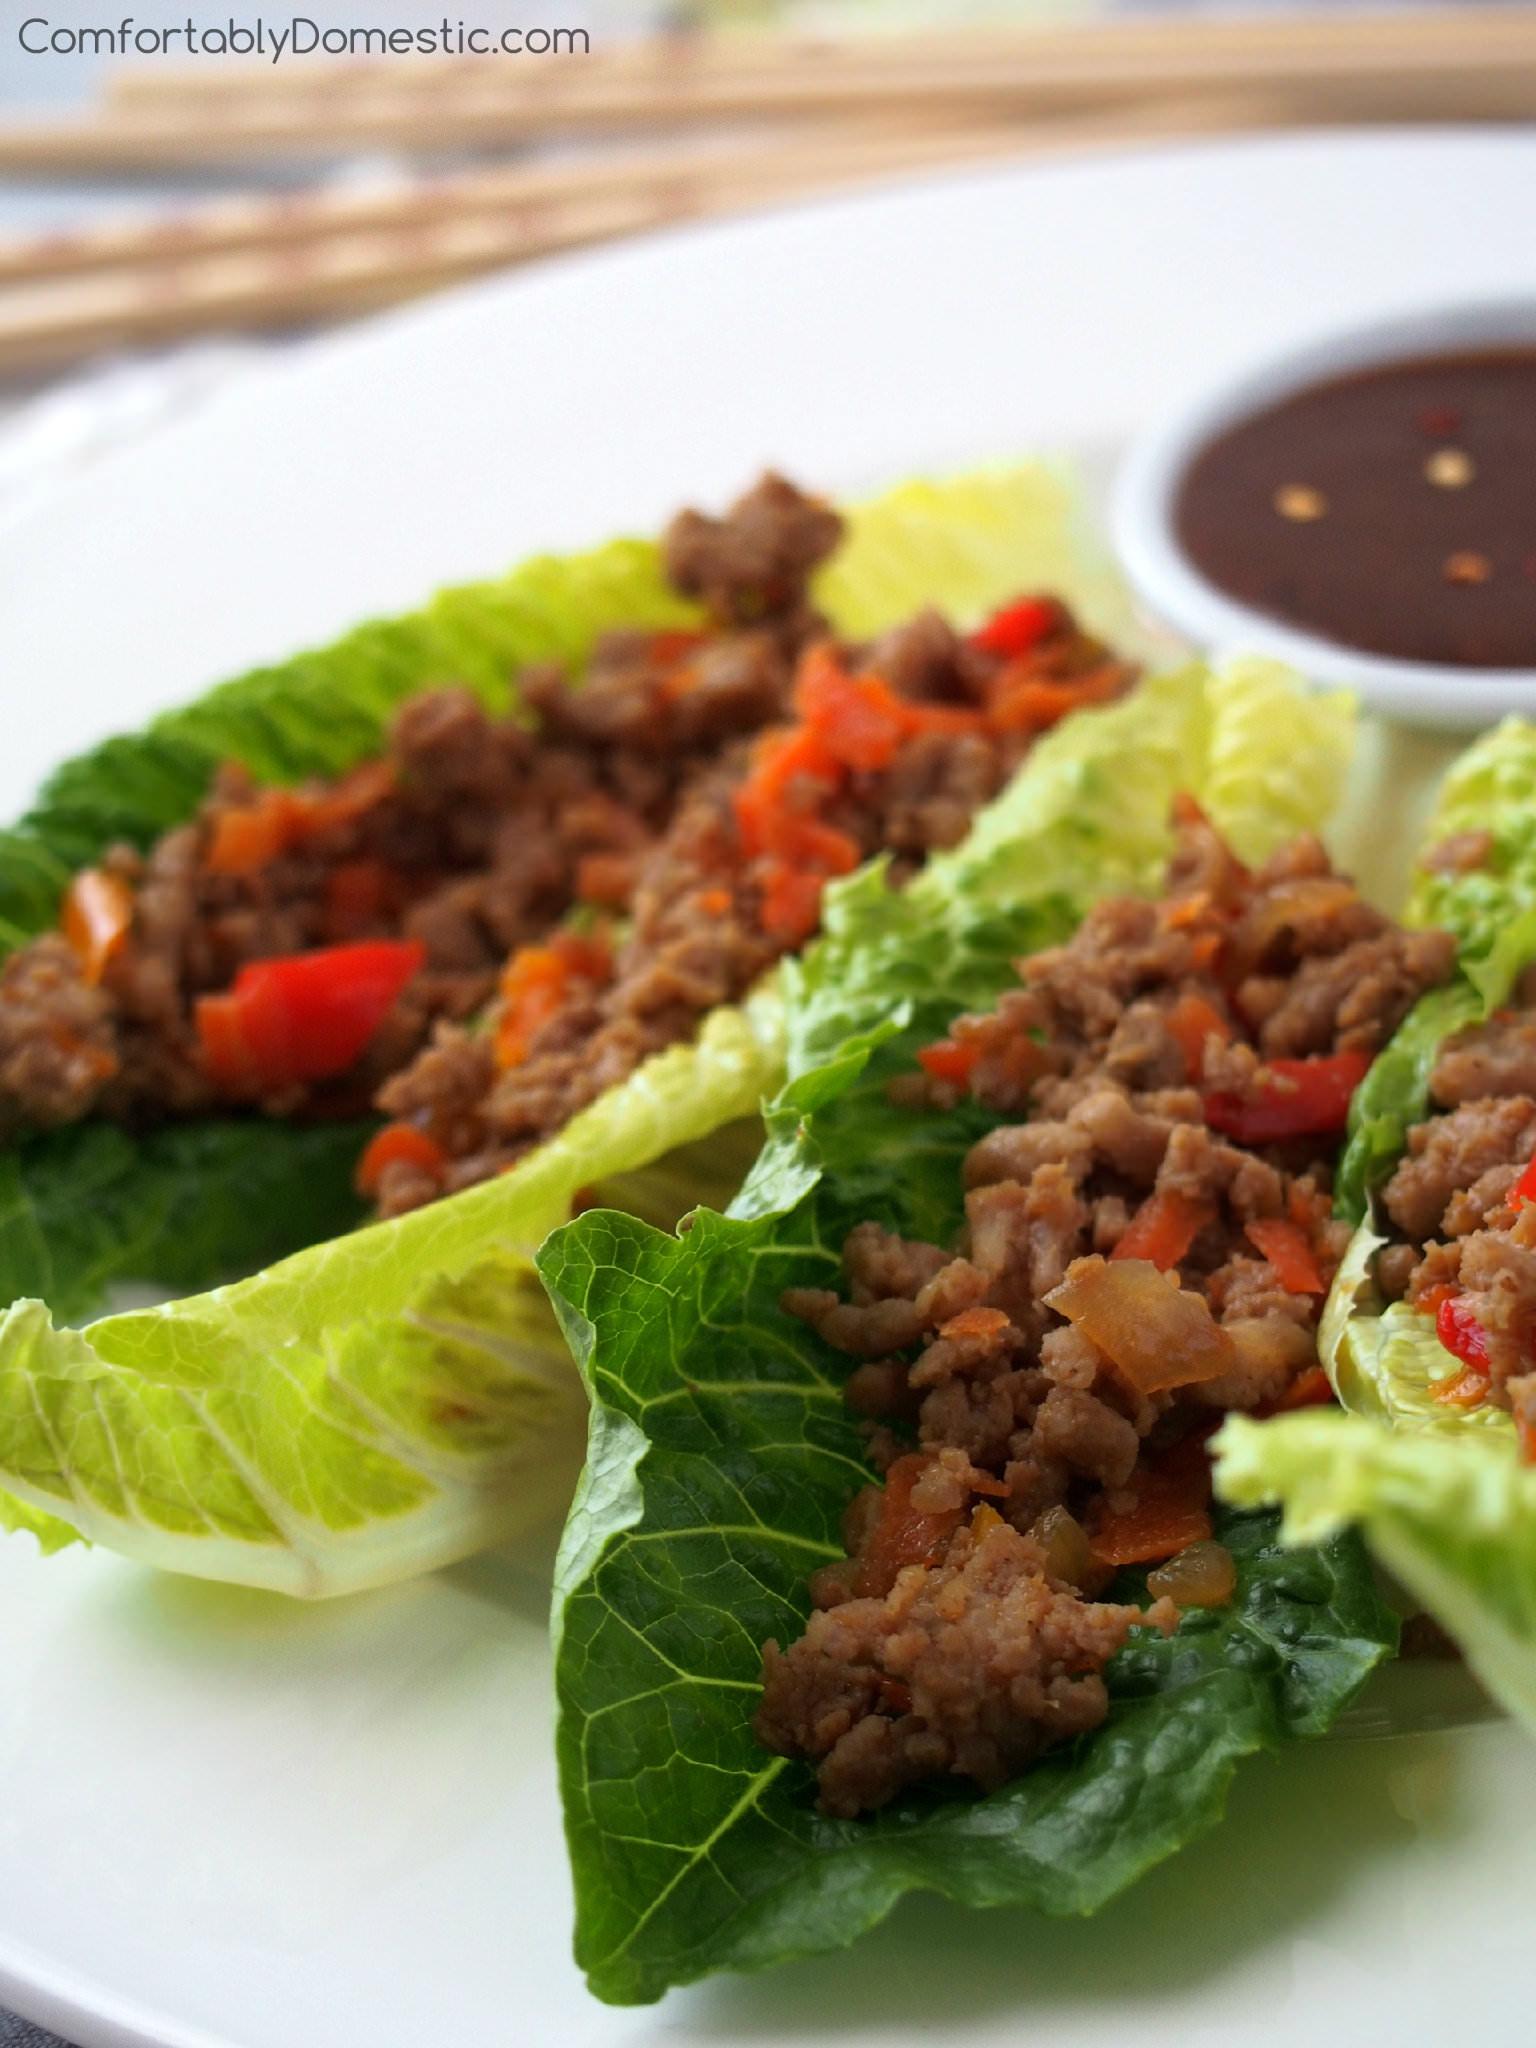 P.F. Chang's lettuce wraps are delicious, but this recipe is better! A lighter version of the sweet, salty, savory P.F. Chang’s lettuce wraps, made with a blend of ground turkey and lean pork, shredded vegetables, and a tasty soy-ginger sauce that is fantastic on just about everything. | ComfortablyDomestic.com